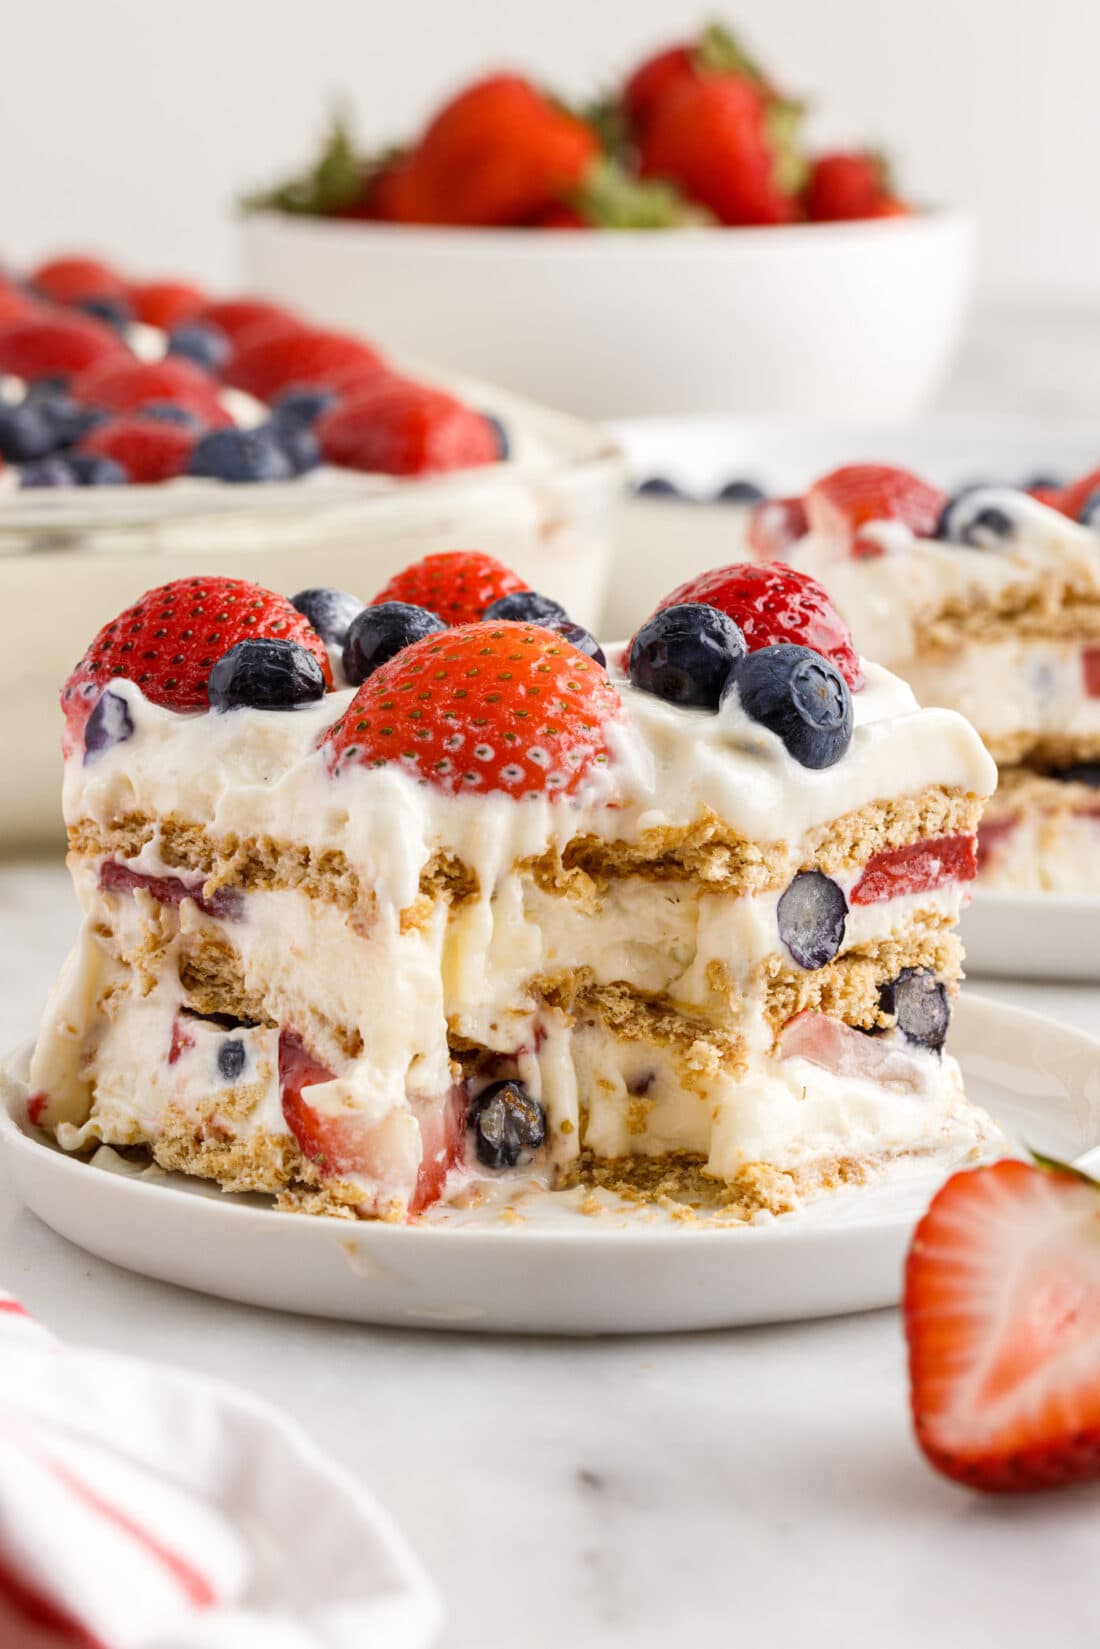 slice of Mixed Berry Icebox Cake with a bite out of it